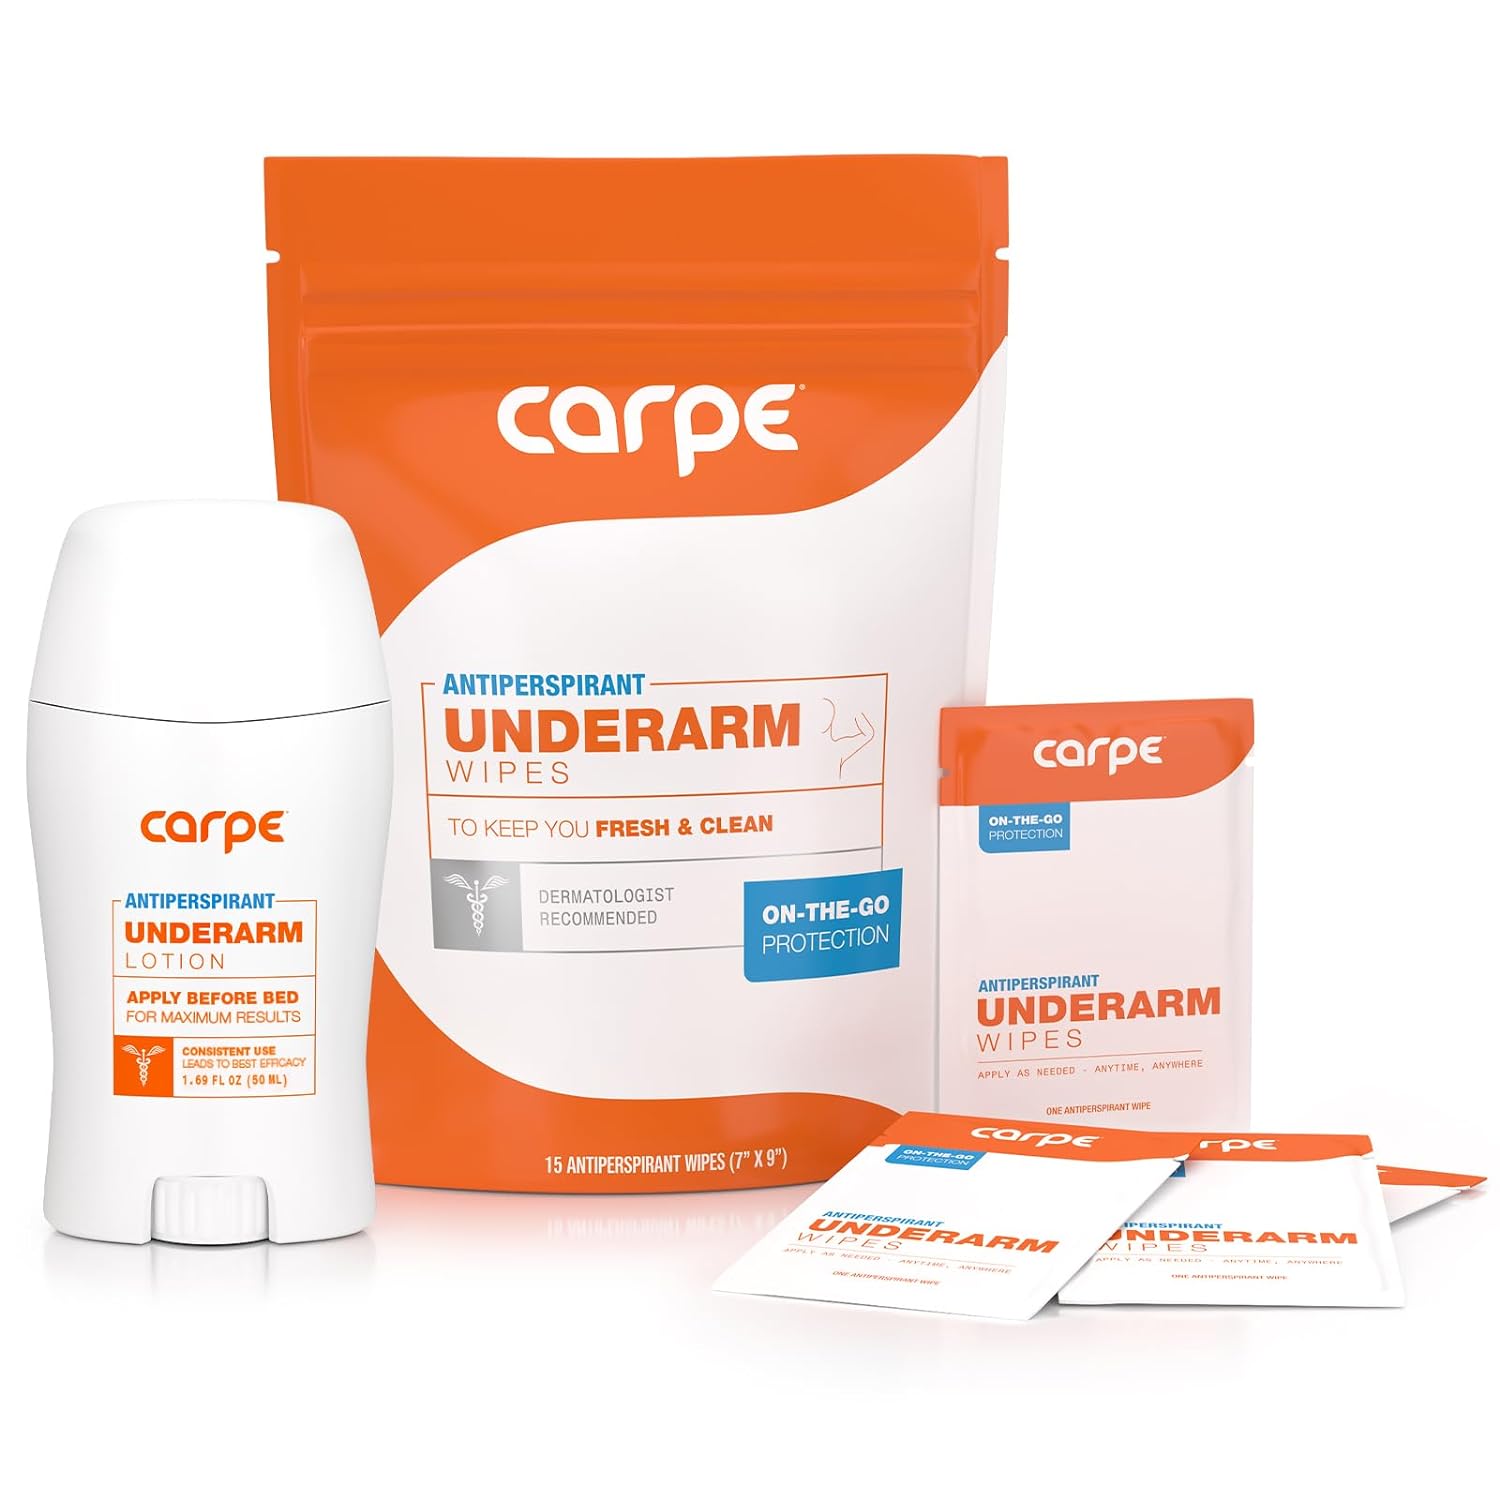 Carpe Antiperspirant Underarm and On-The-Go Wipes Package (1 Underarm Clinical Strength, 15 Individual Antiperspirant On-The-Go Wipes), Stop Excessive Sweat - Great for Hyperhidrosis